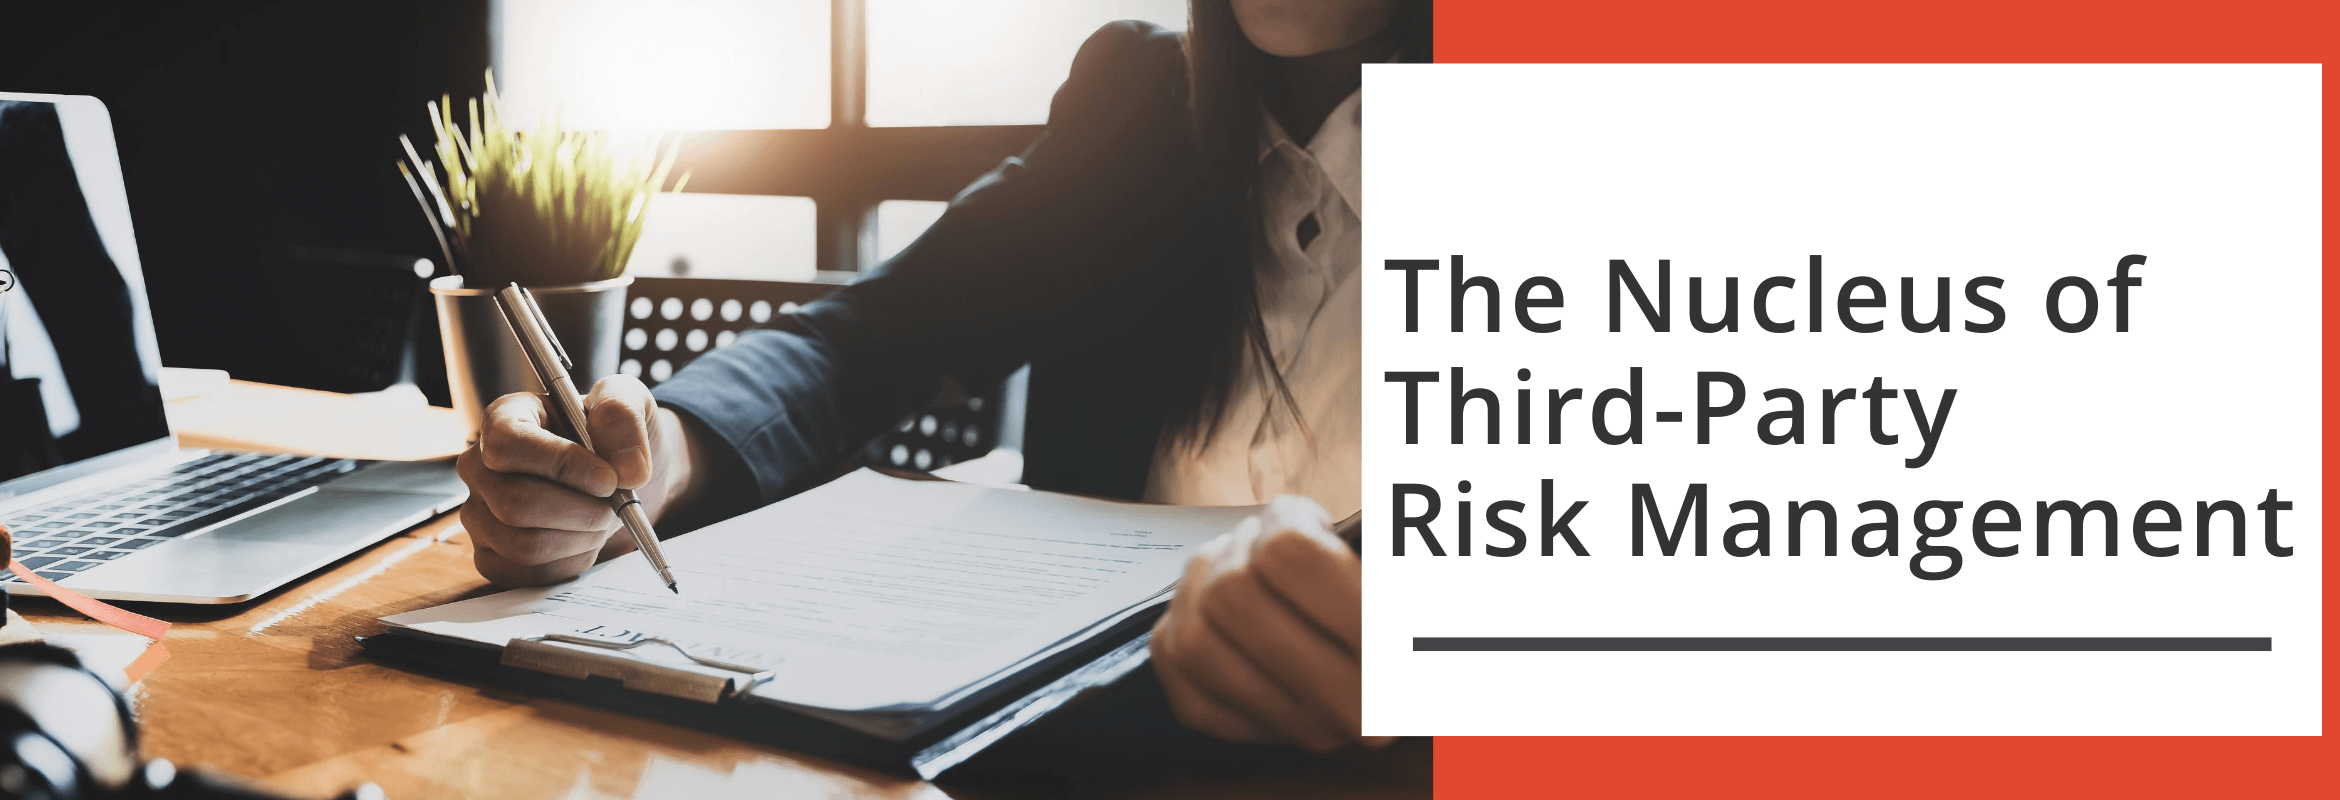 The Relationship Manager is the first line of defense in third-party risk management.